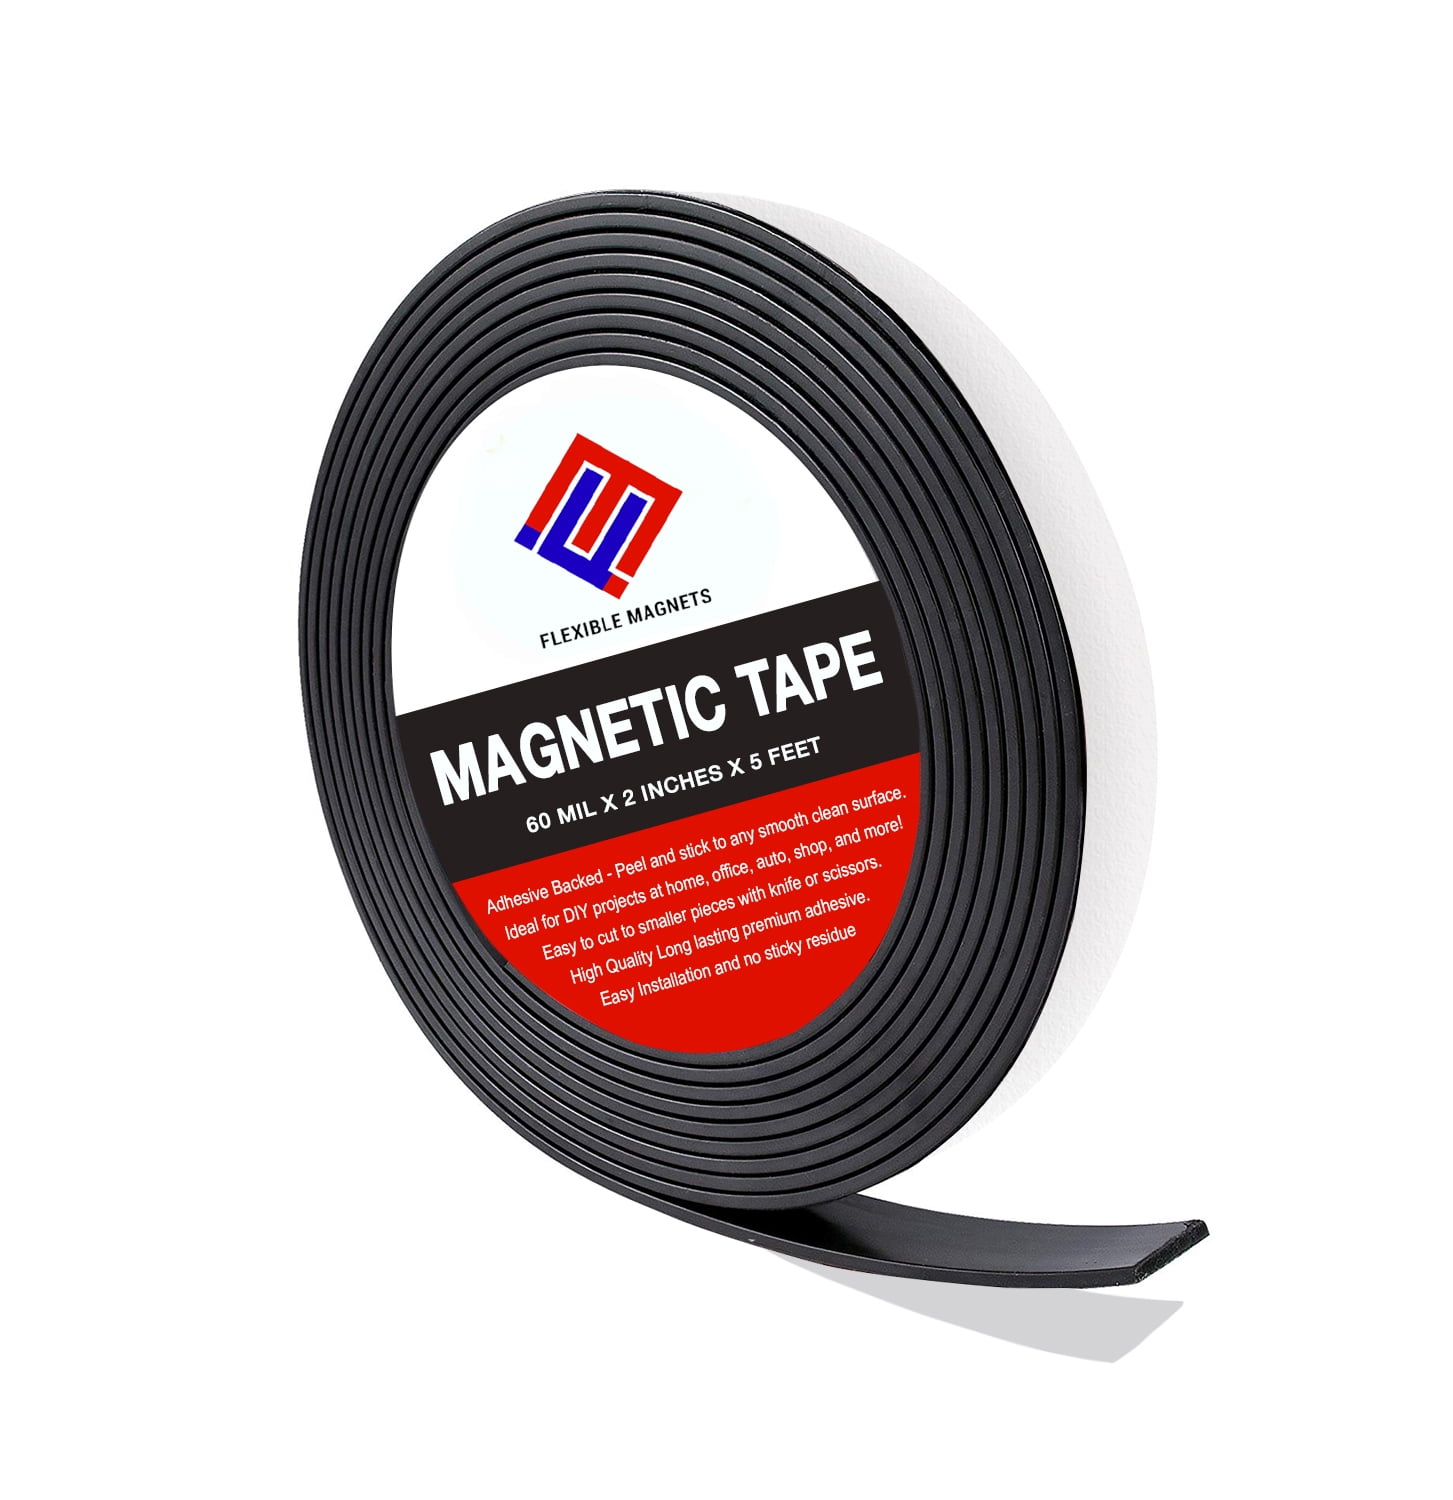 2M5MMC5 ATack Magnetic Tape Strip Roll, 1/2-Inch x 10-Foot, Pack of 3,  Self-Adhesive, Peel and Stick on Double-Sided Magnet Strips